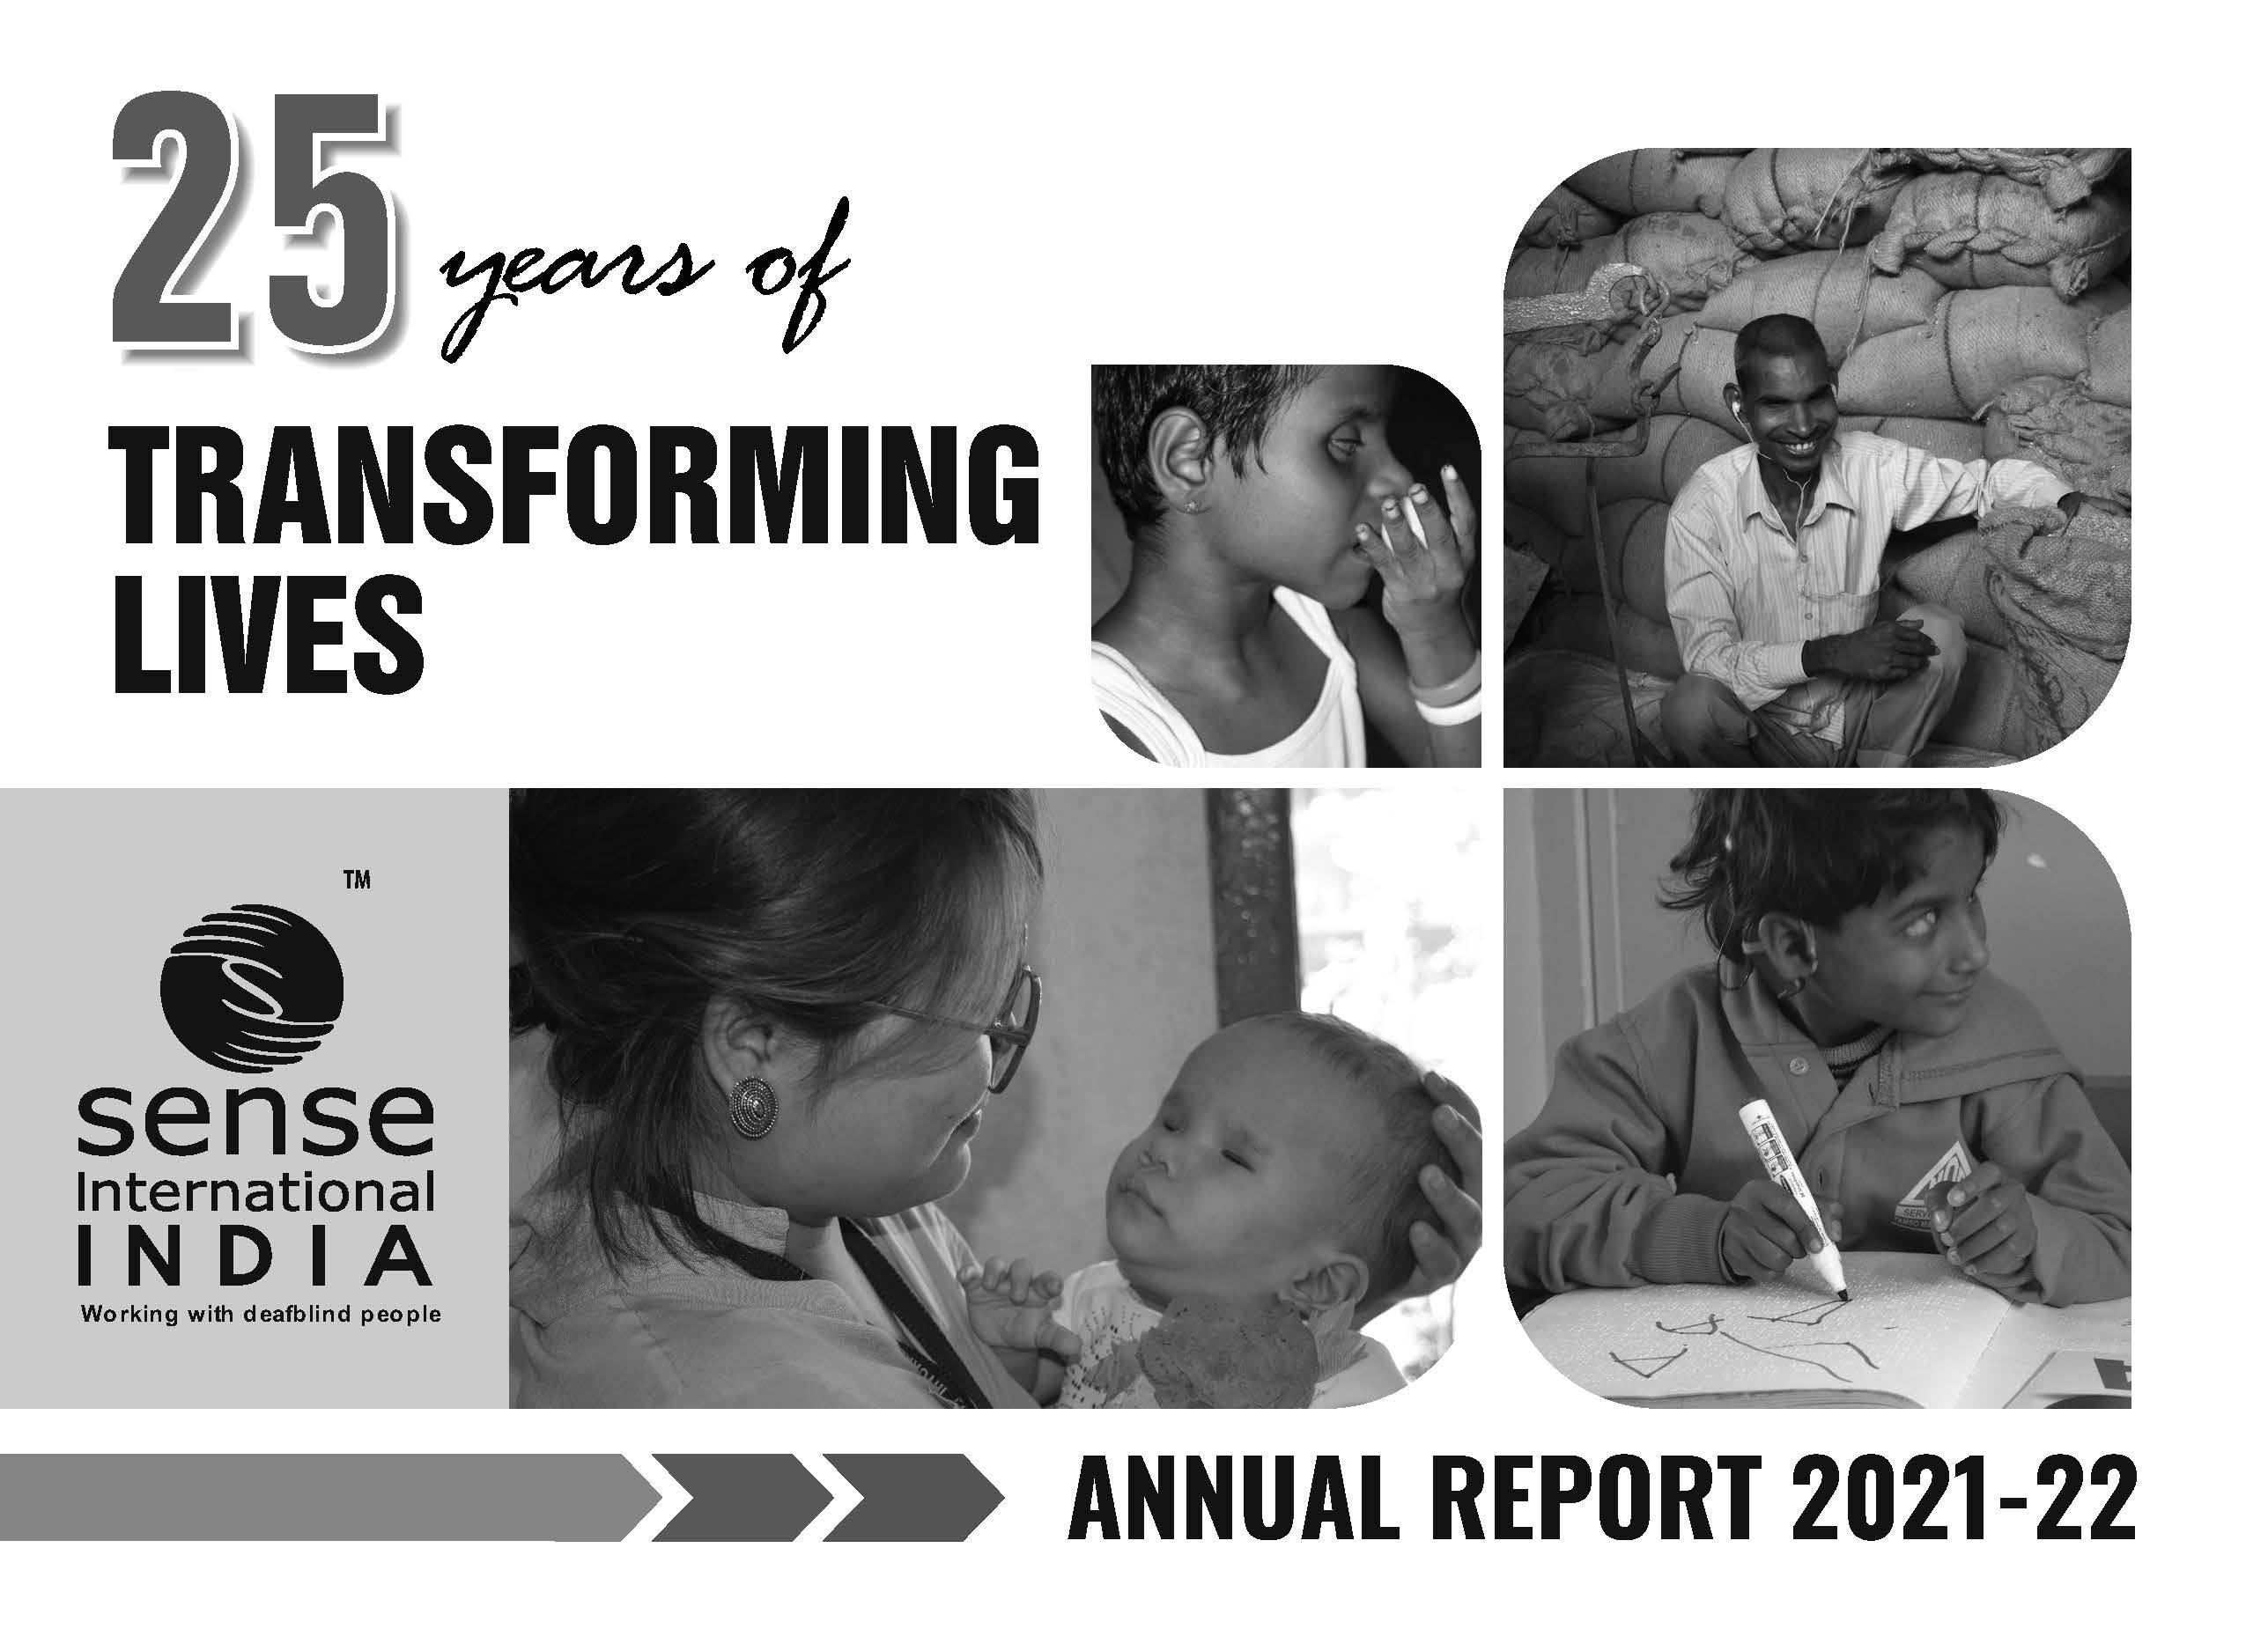 Annual Report of Sense International India for the year 2021 - 2022 class=